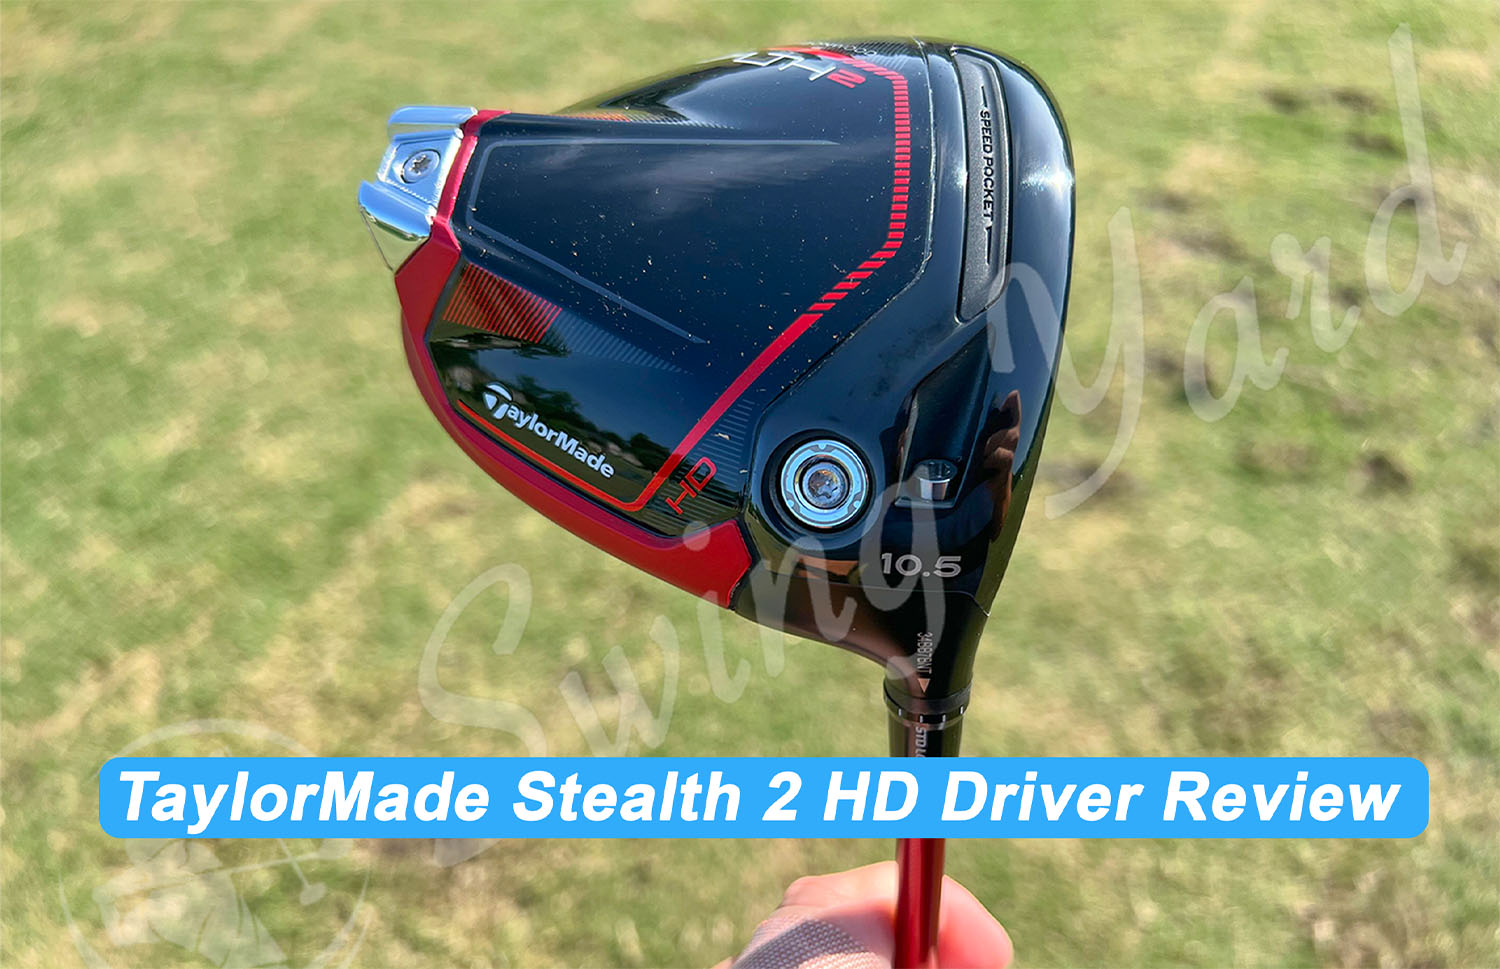 my taylormade stealth 2 hd driver review